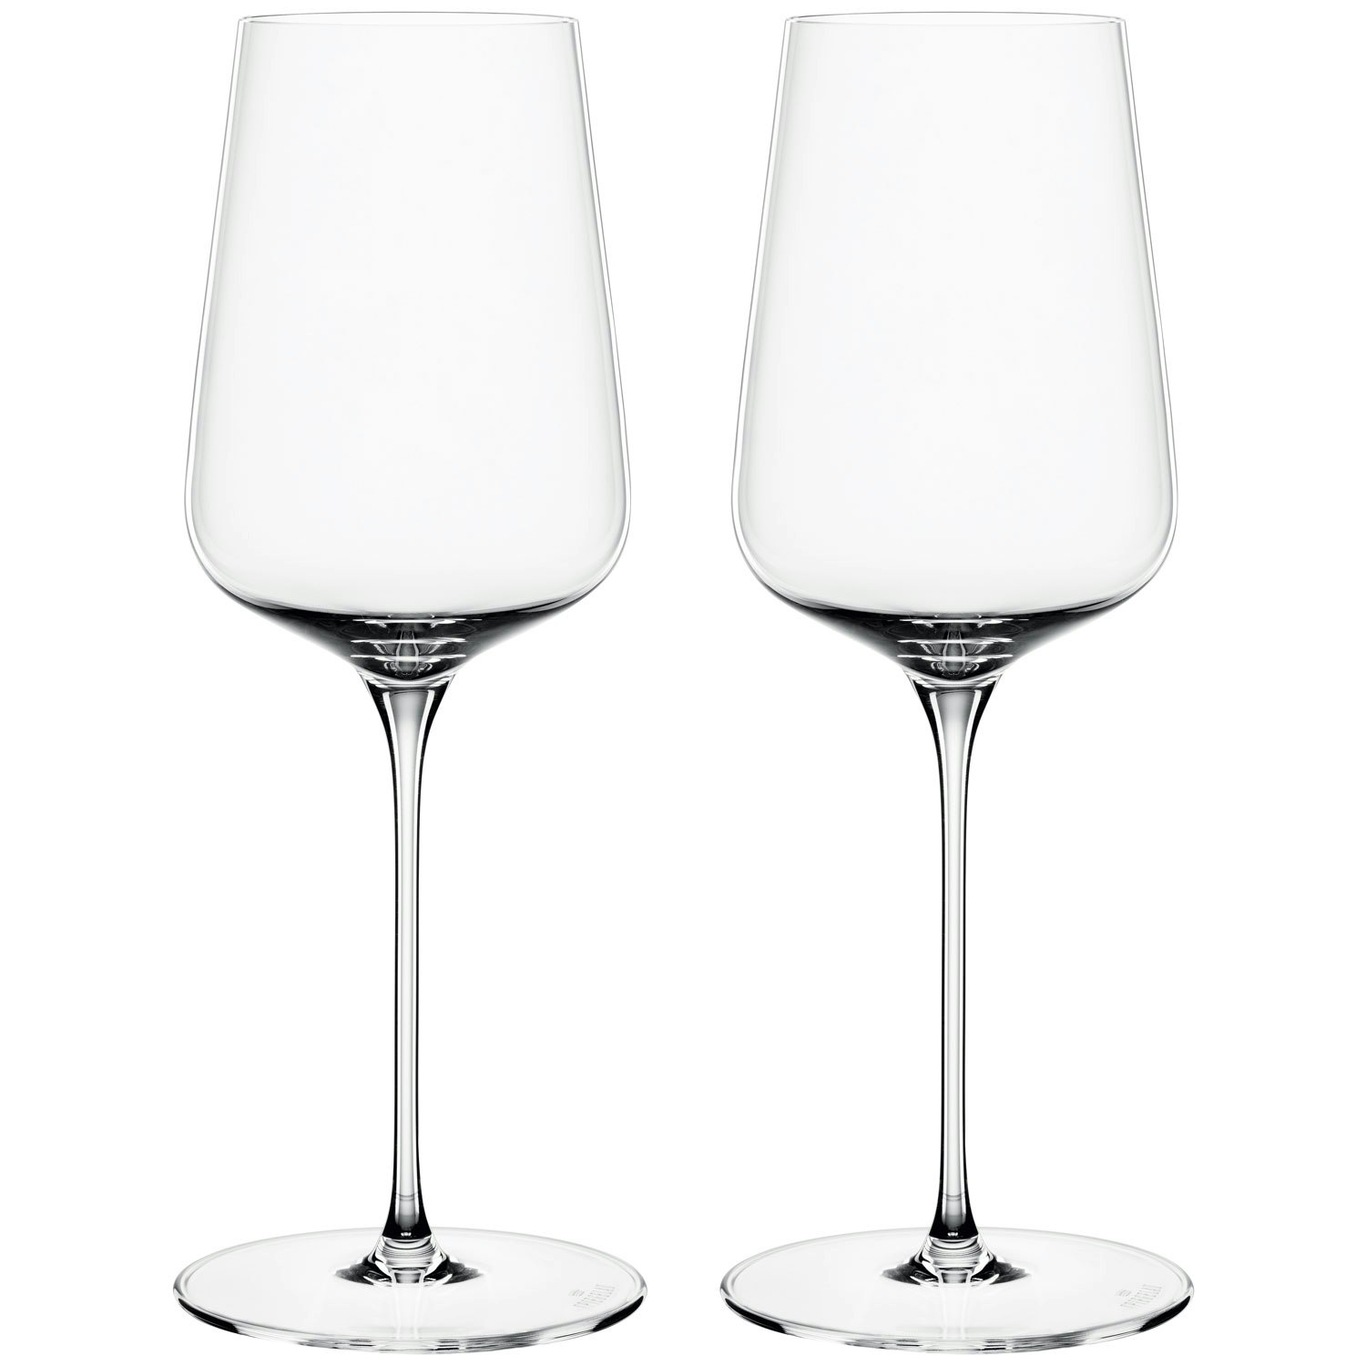 Definition White Wine Glass 43 cl, 2-pack